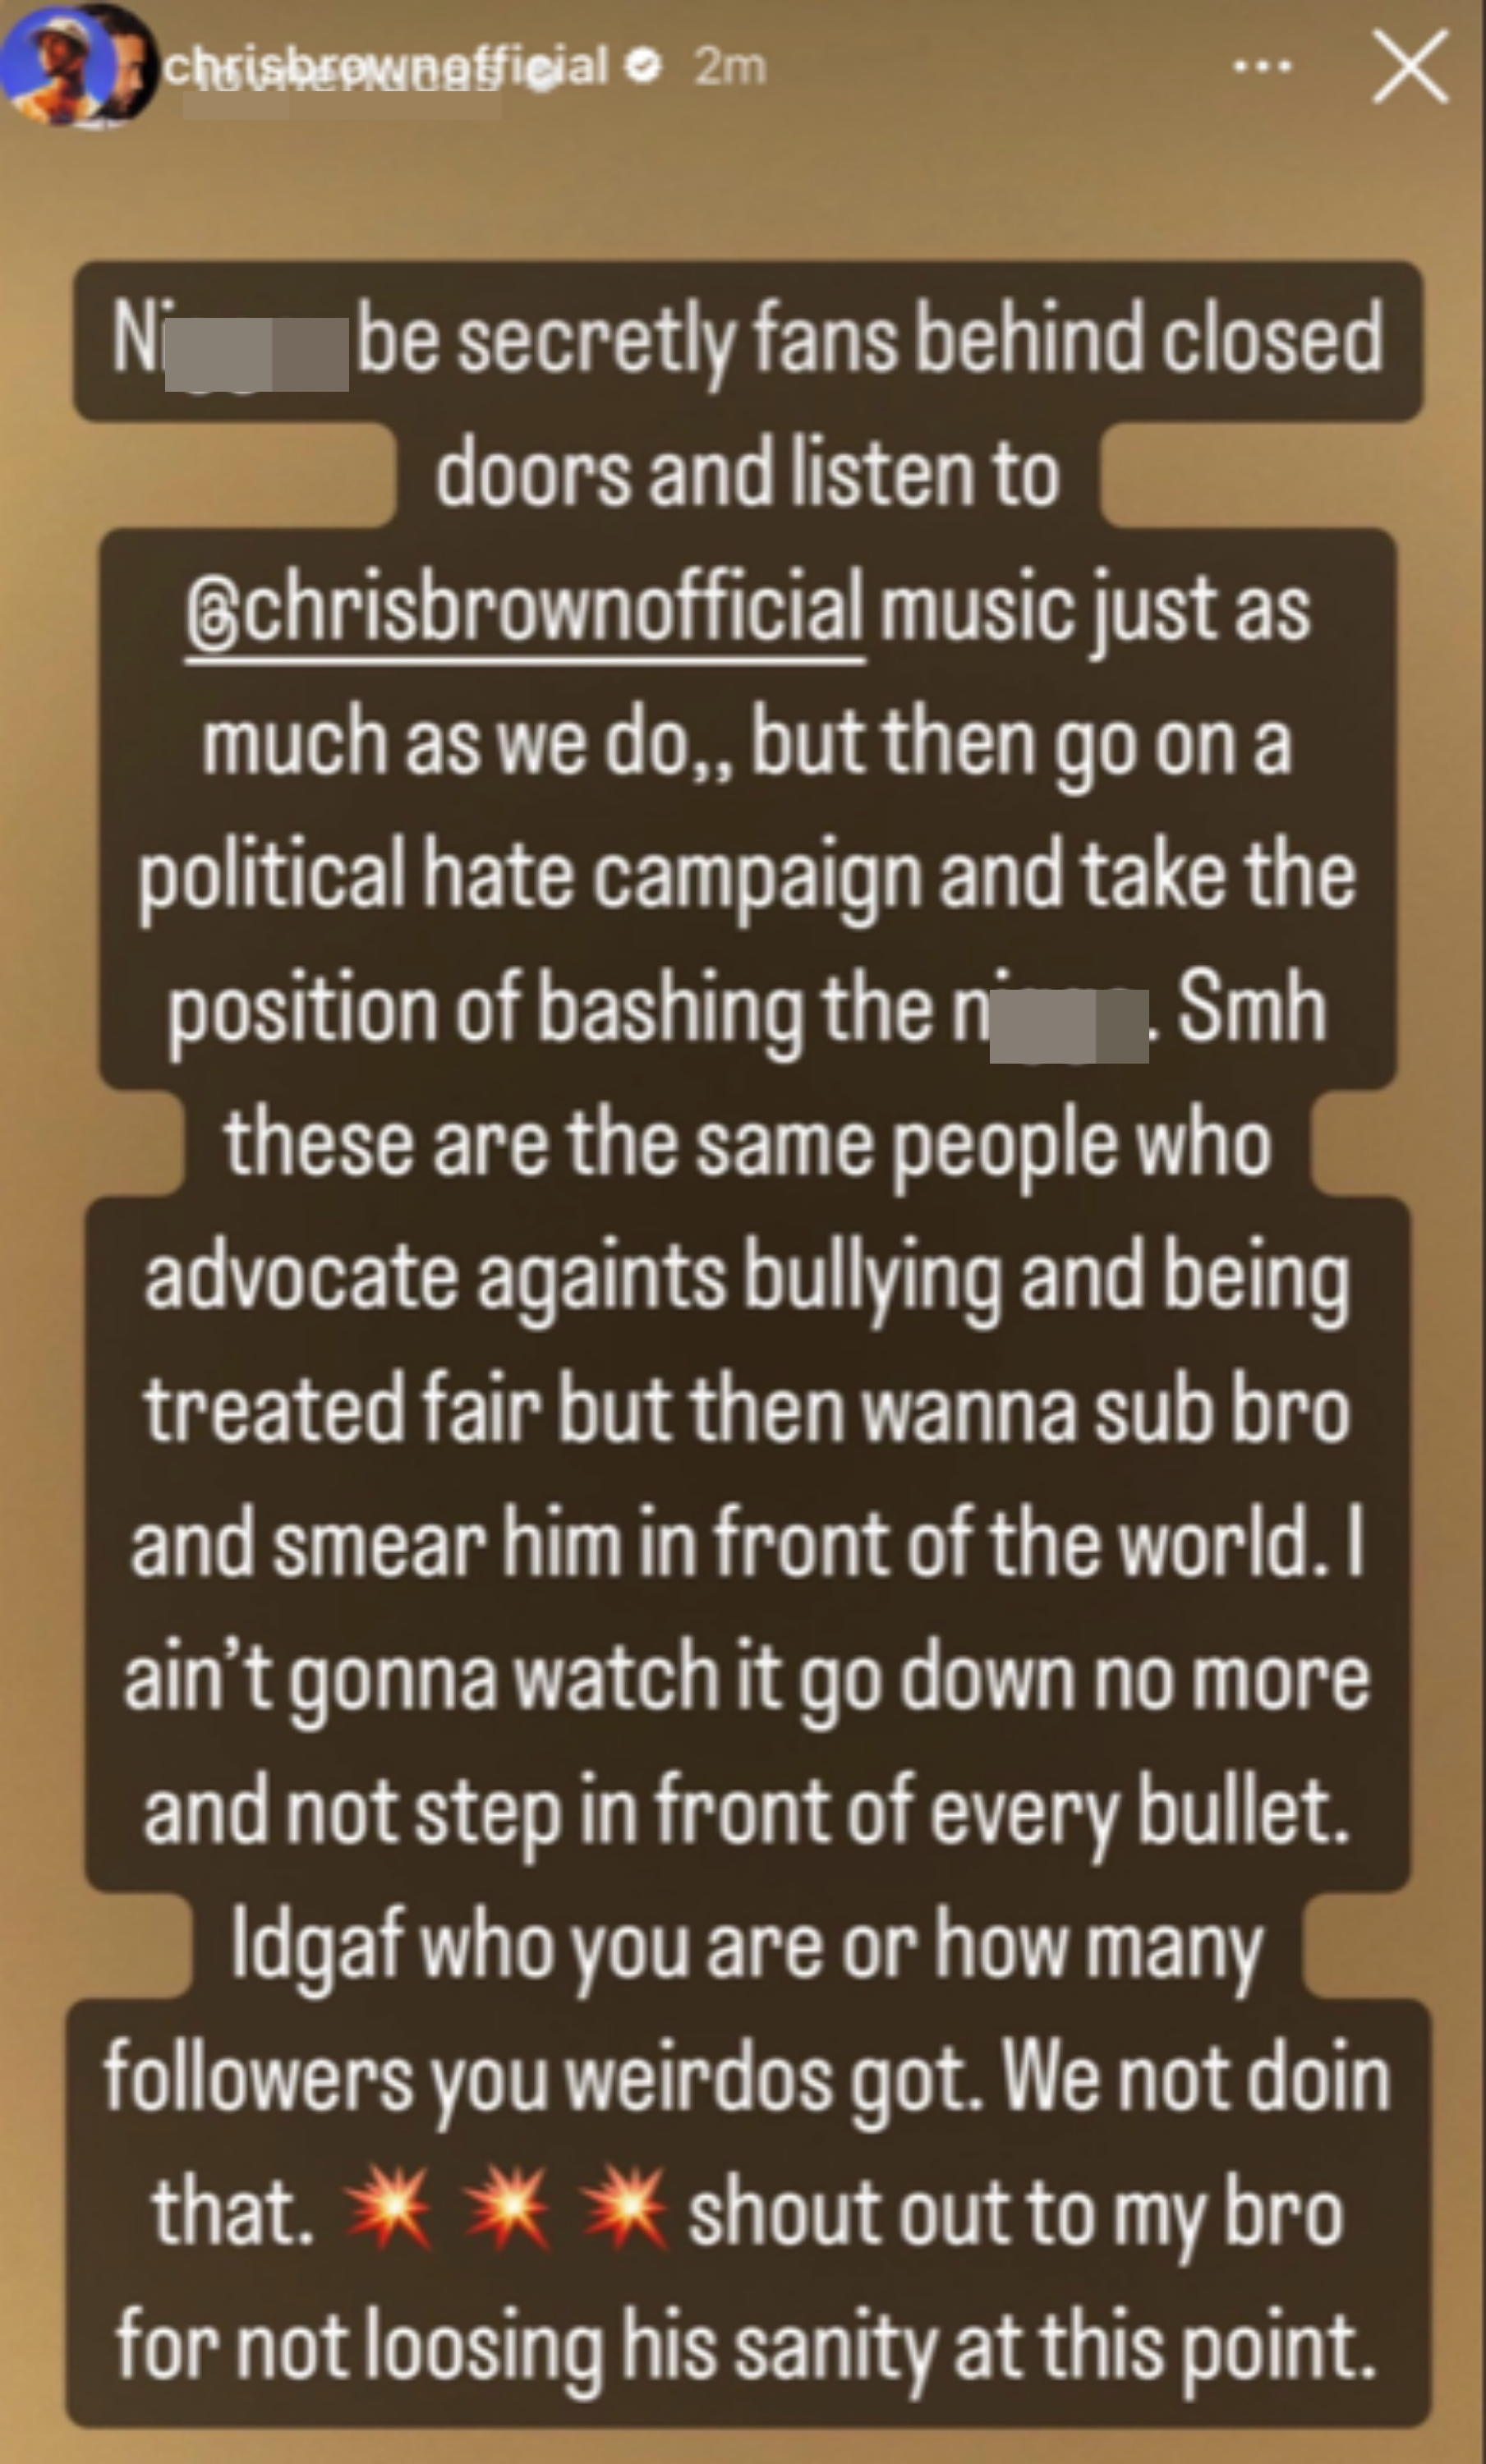 From his IG story: &quot;N*ggas be secretly fans behind closed doors and listen to @chrisbrownofficial must just as much as we do&quot; and &quot;Smh these are the same people who advocate against bullying and being treated fair&quot;